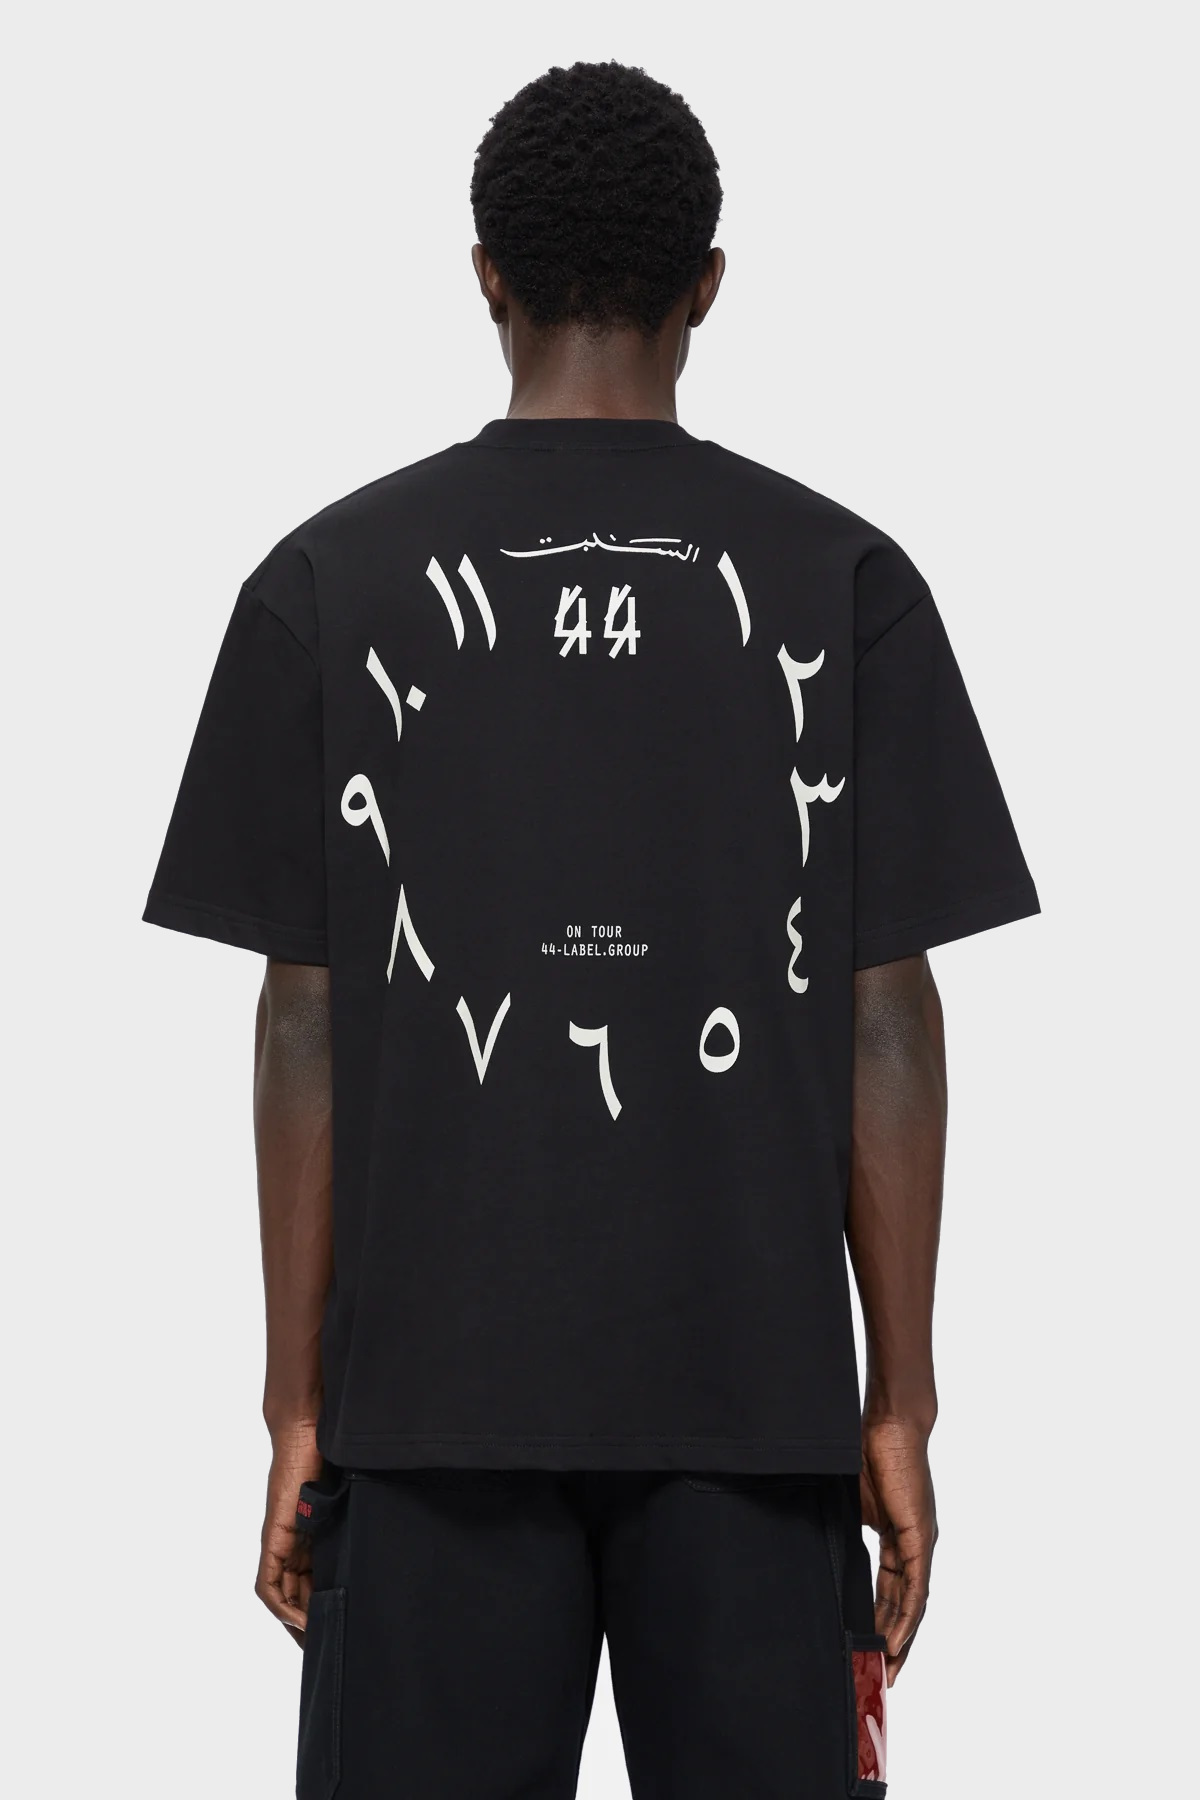 44 LABEL GROUP Arabic Dial Tee in Black L